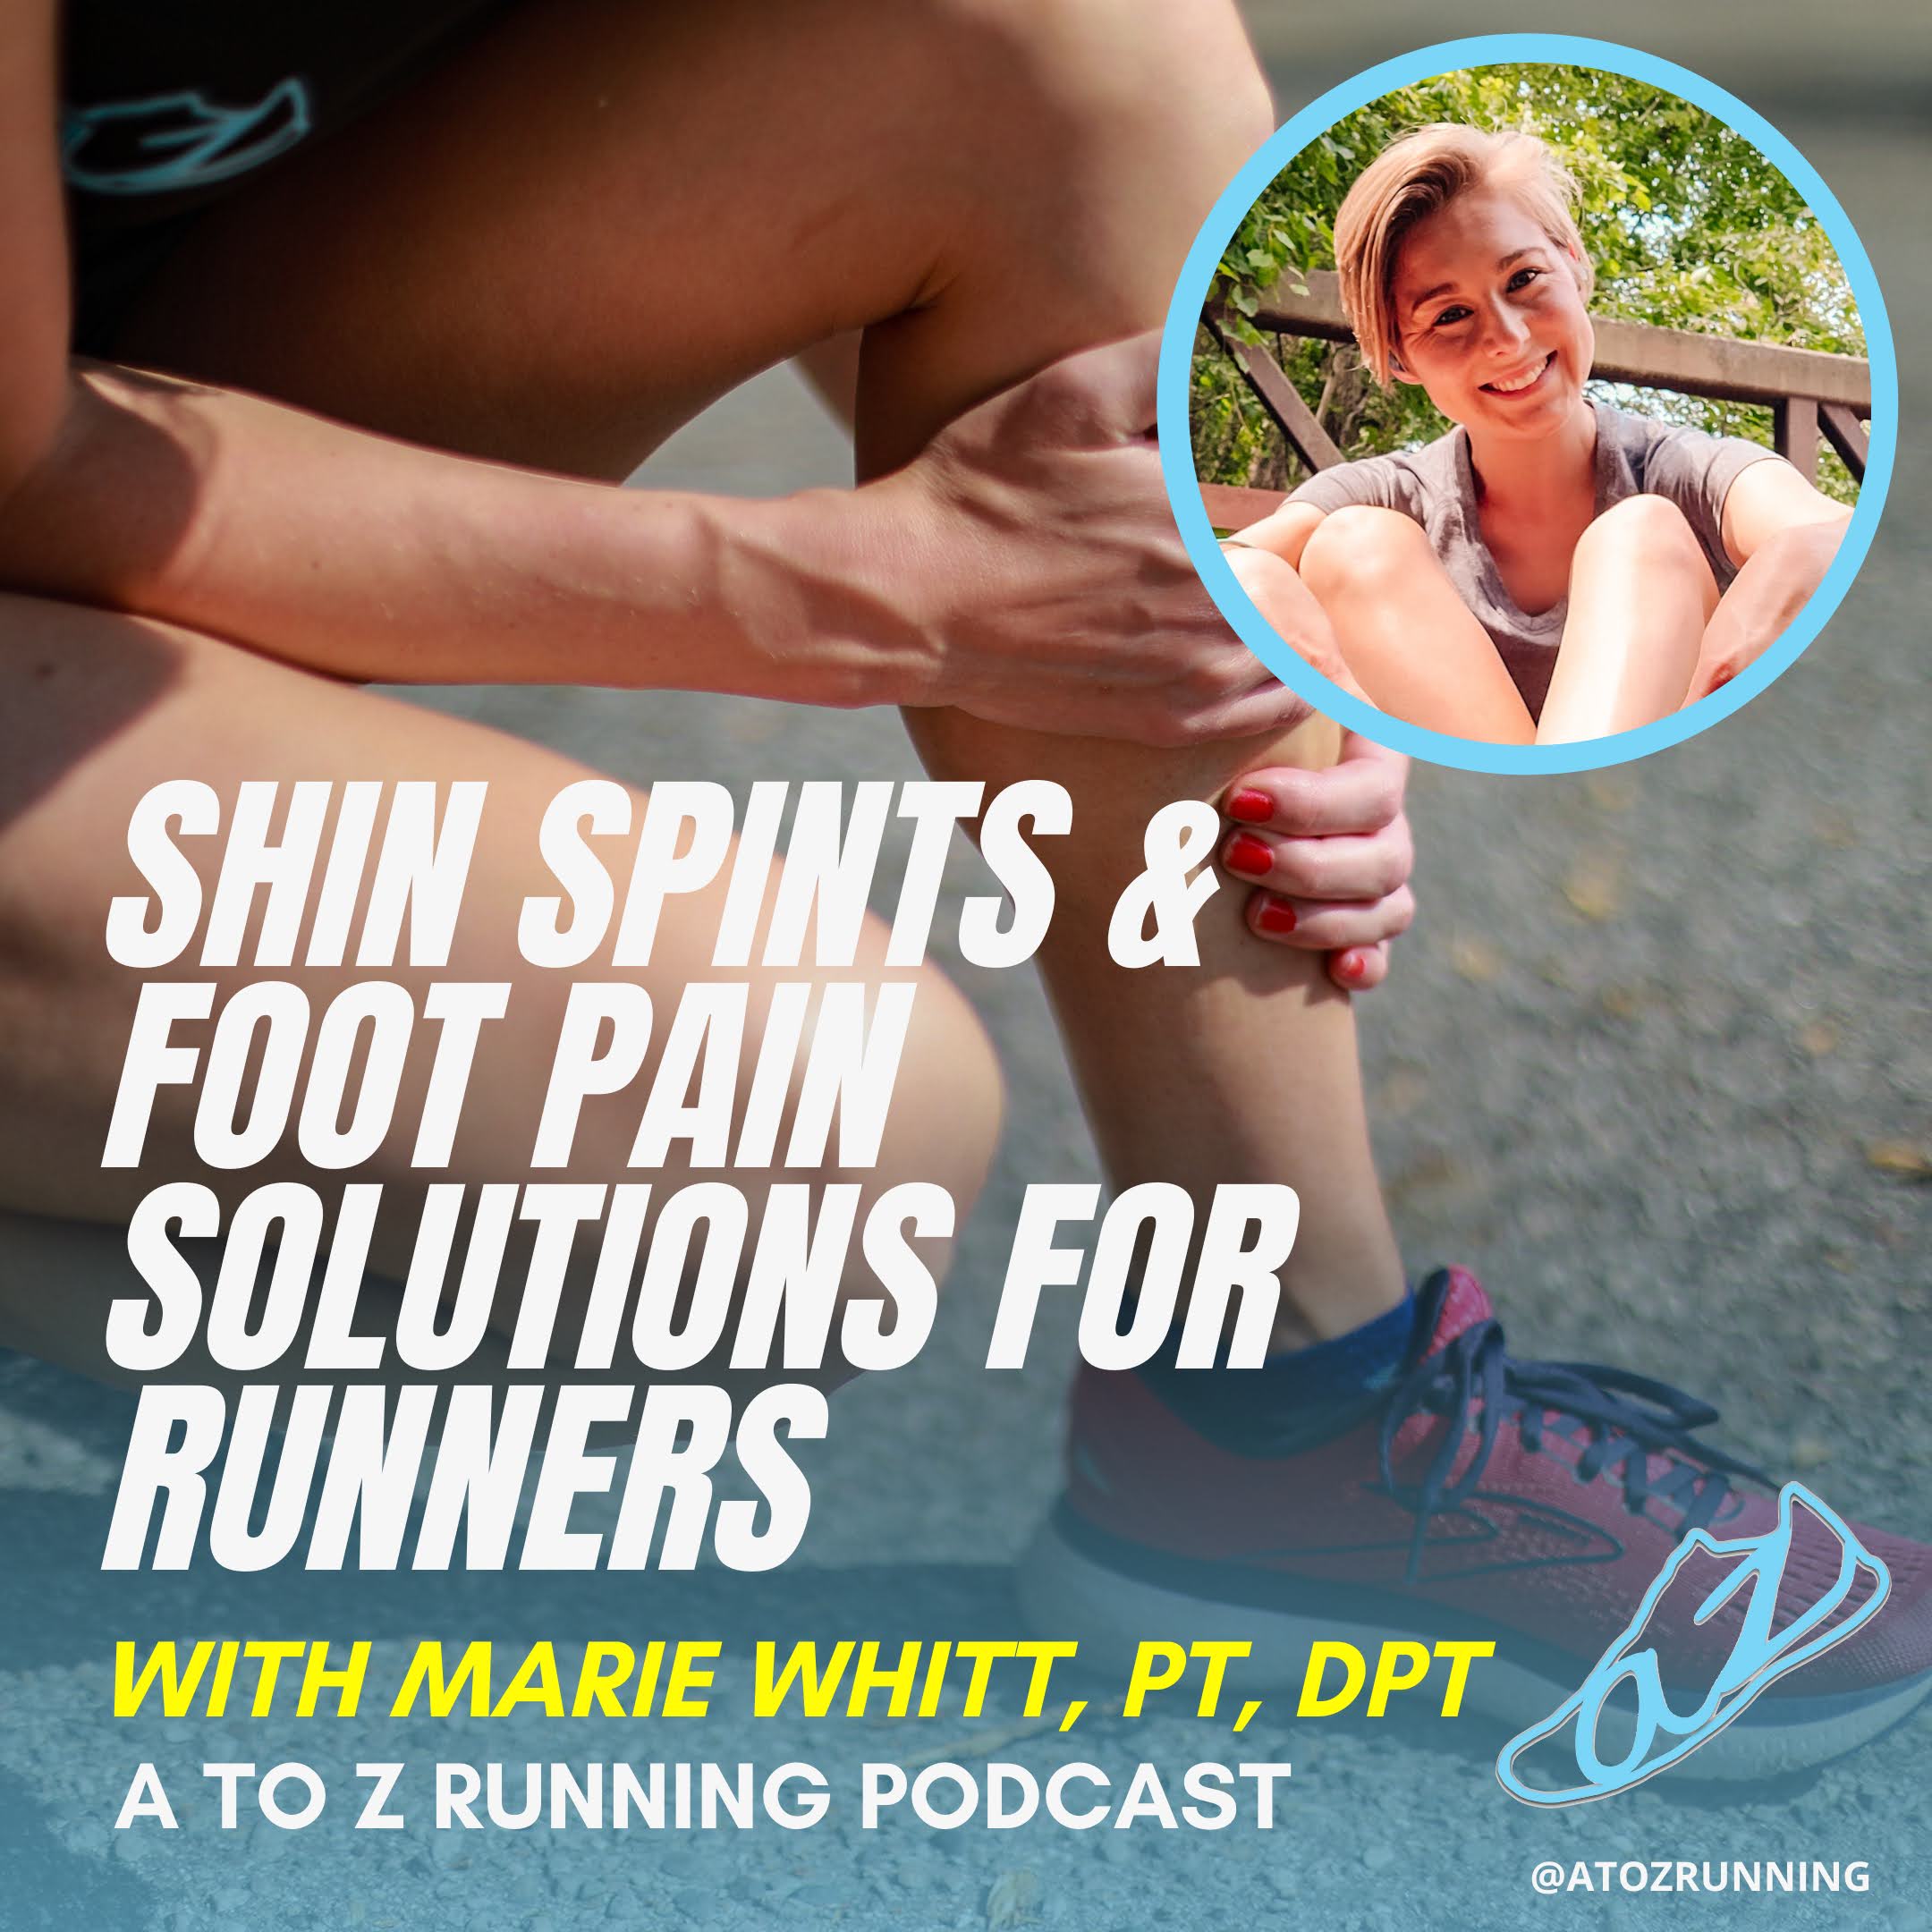 Shin Splints and foot pain solutions for runners podcast cover photo with runner holding shin.